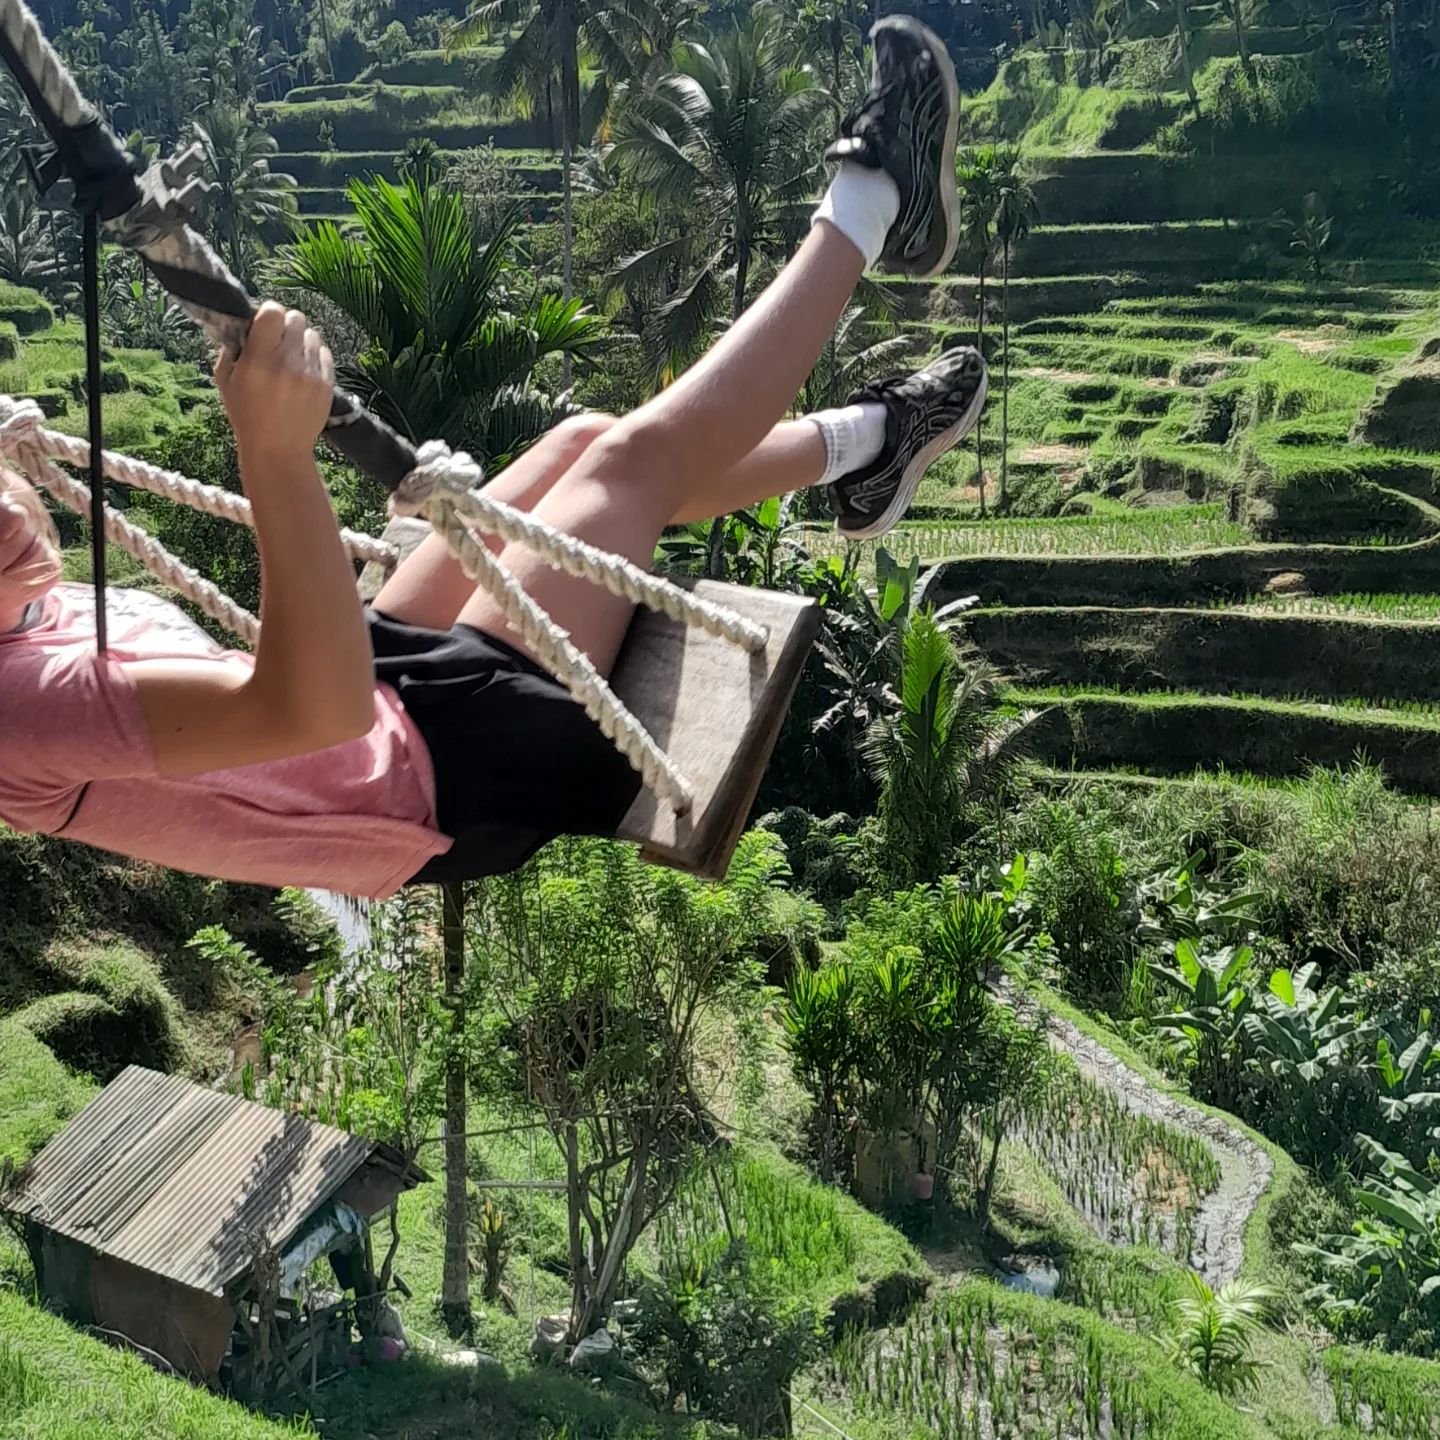 5-night yoga, cultural retreat in Bali.
3rd - 8th July.
www.juliestephensyoga.co.nz 

This photo was taken on our full day mountain bike adventure.

We got picked up around 9 am, stopped at this lush location for a yummy breakfast, and had a swing ov